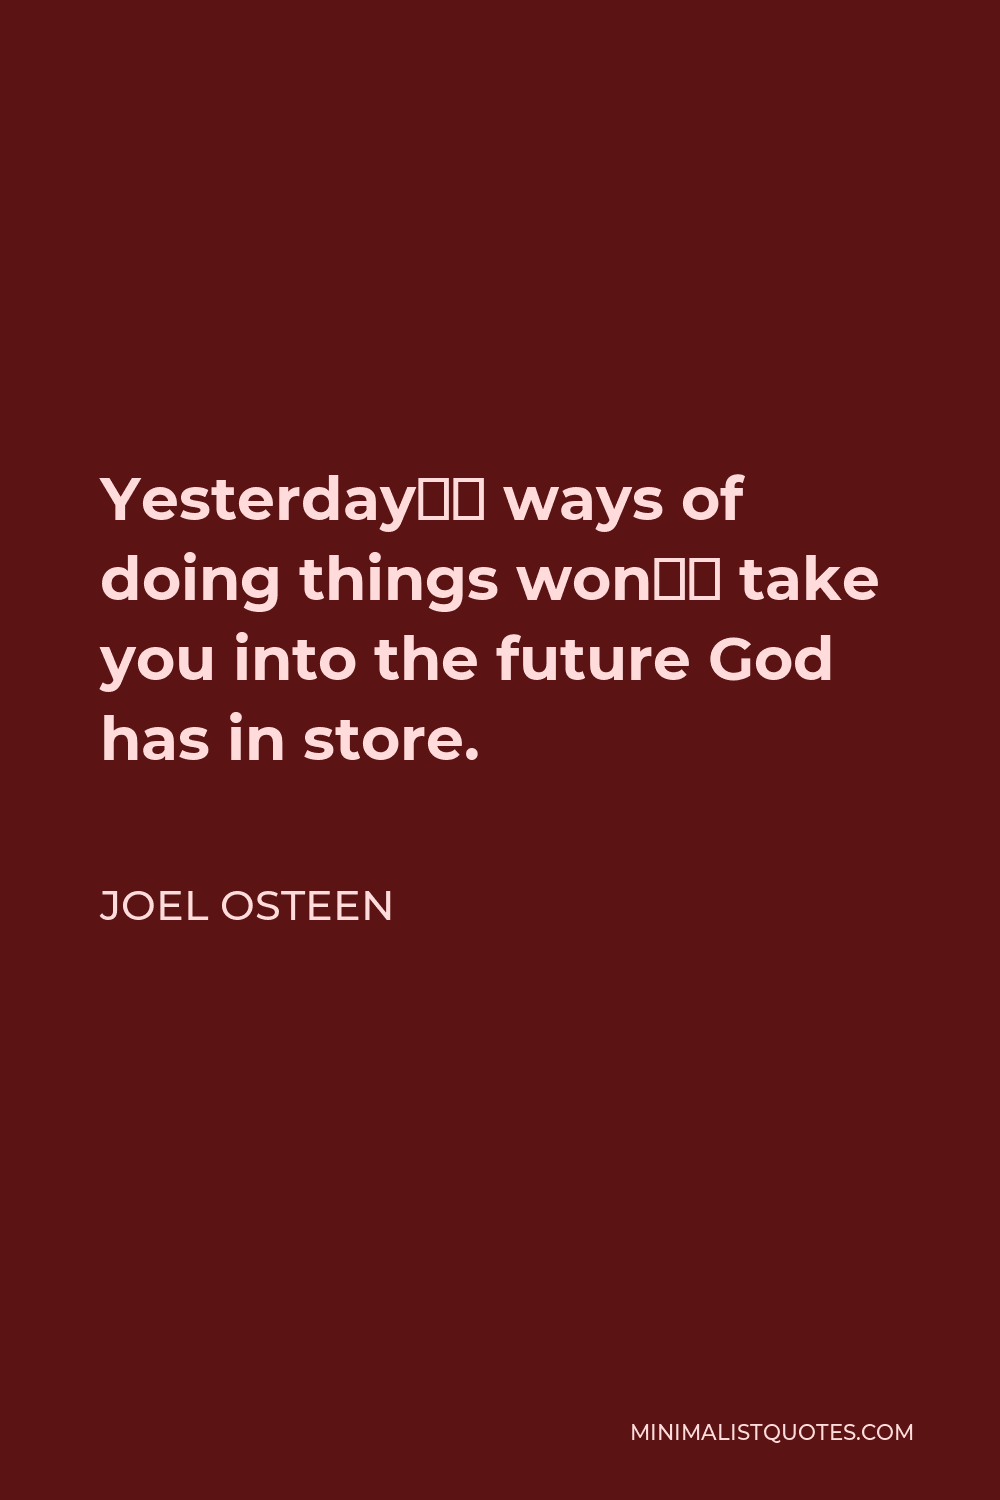 Joel Osteen Quote - Yesterday’s ways of doing things won’t take you into the future God has in store.